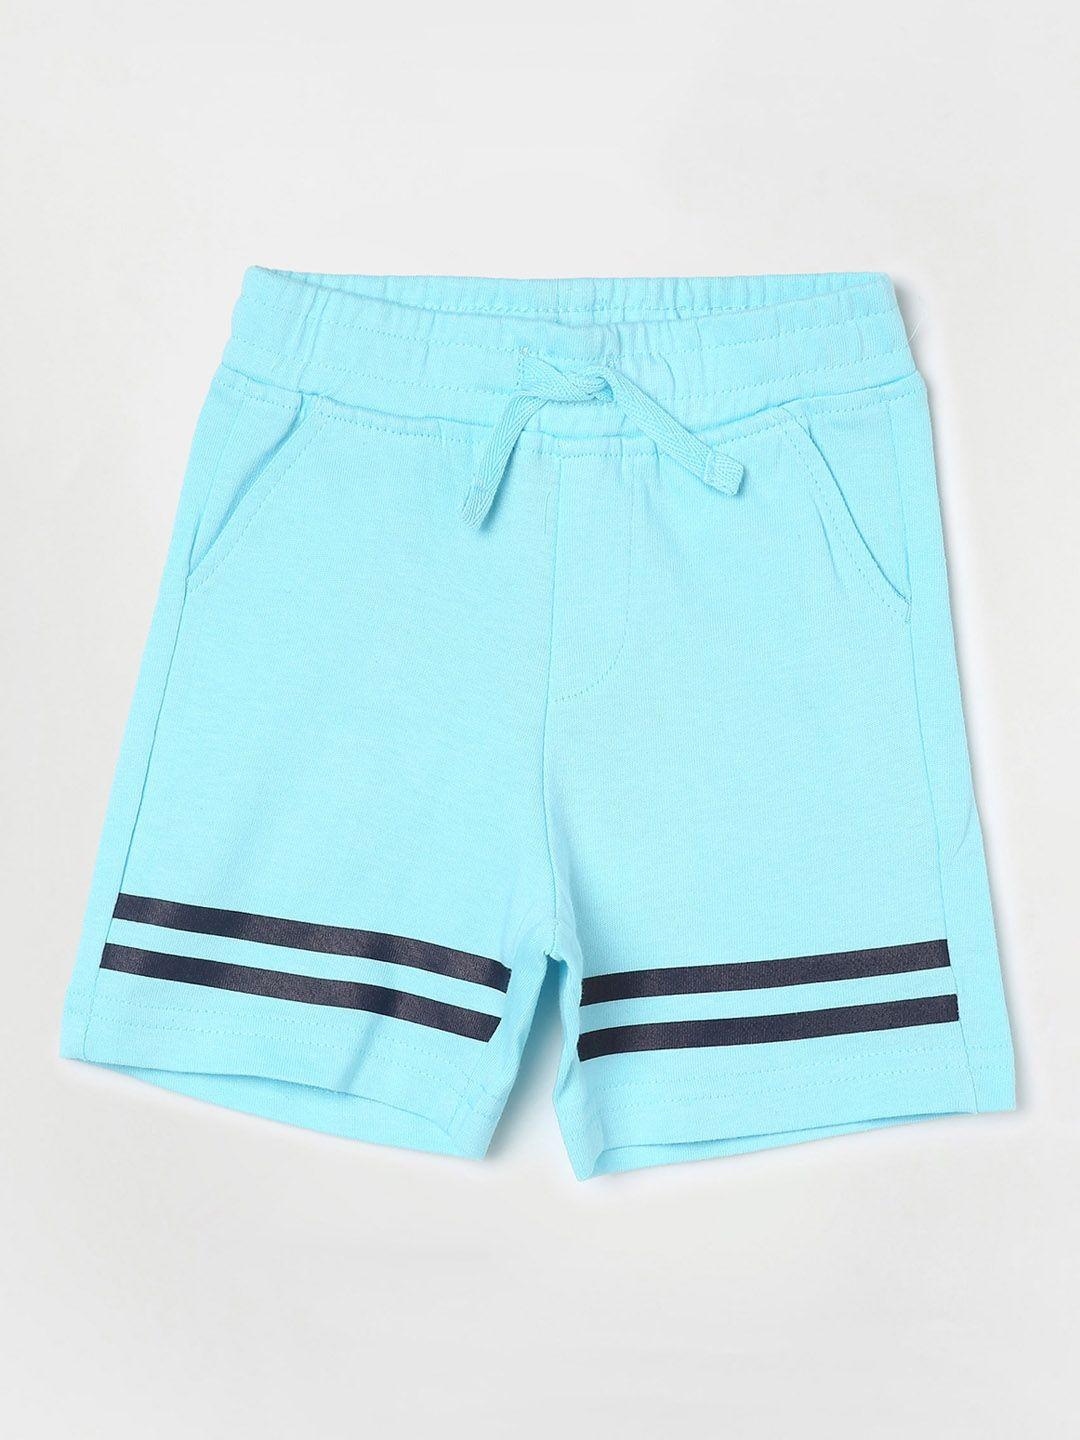 juniors-by-lifestyle-boys-striped-cotton-regular-fit-shorts